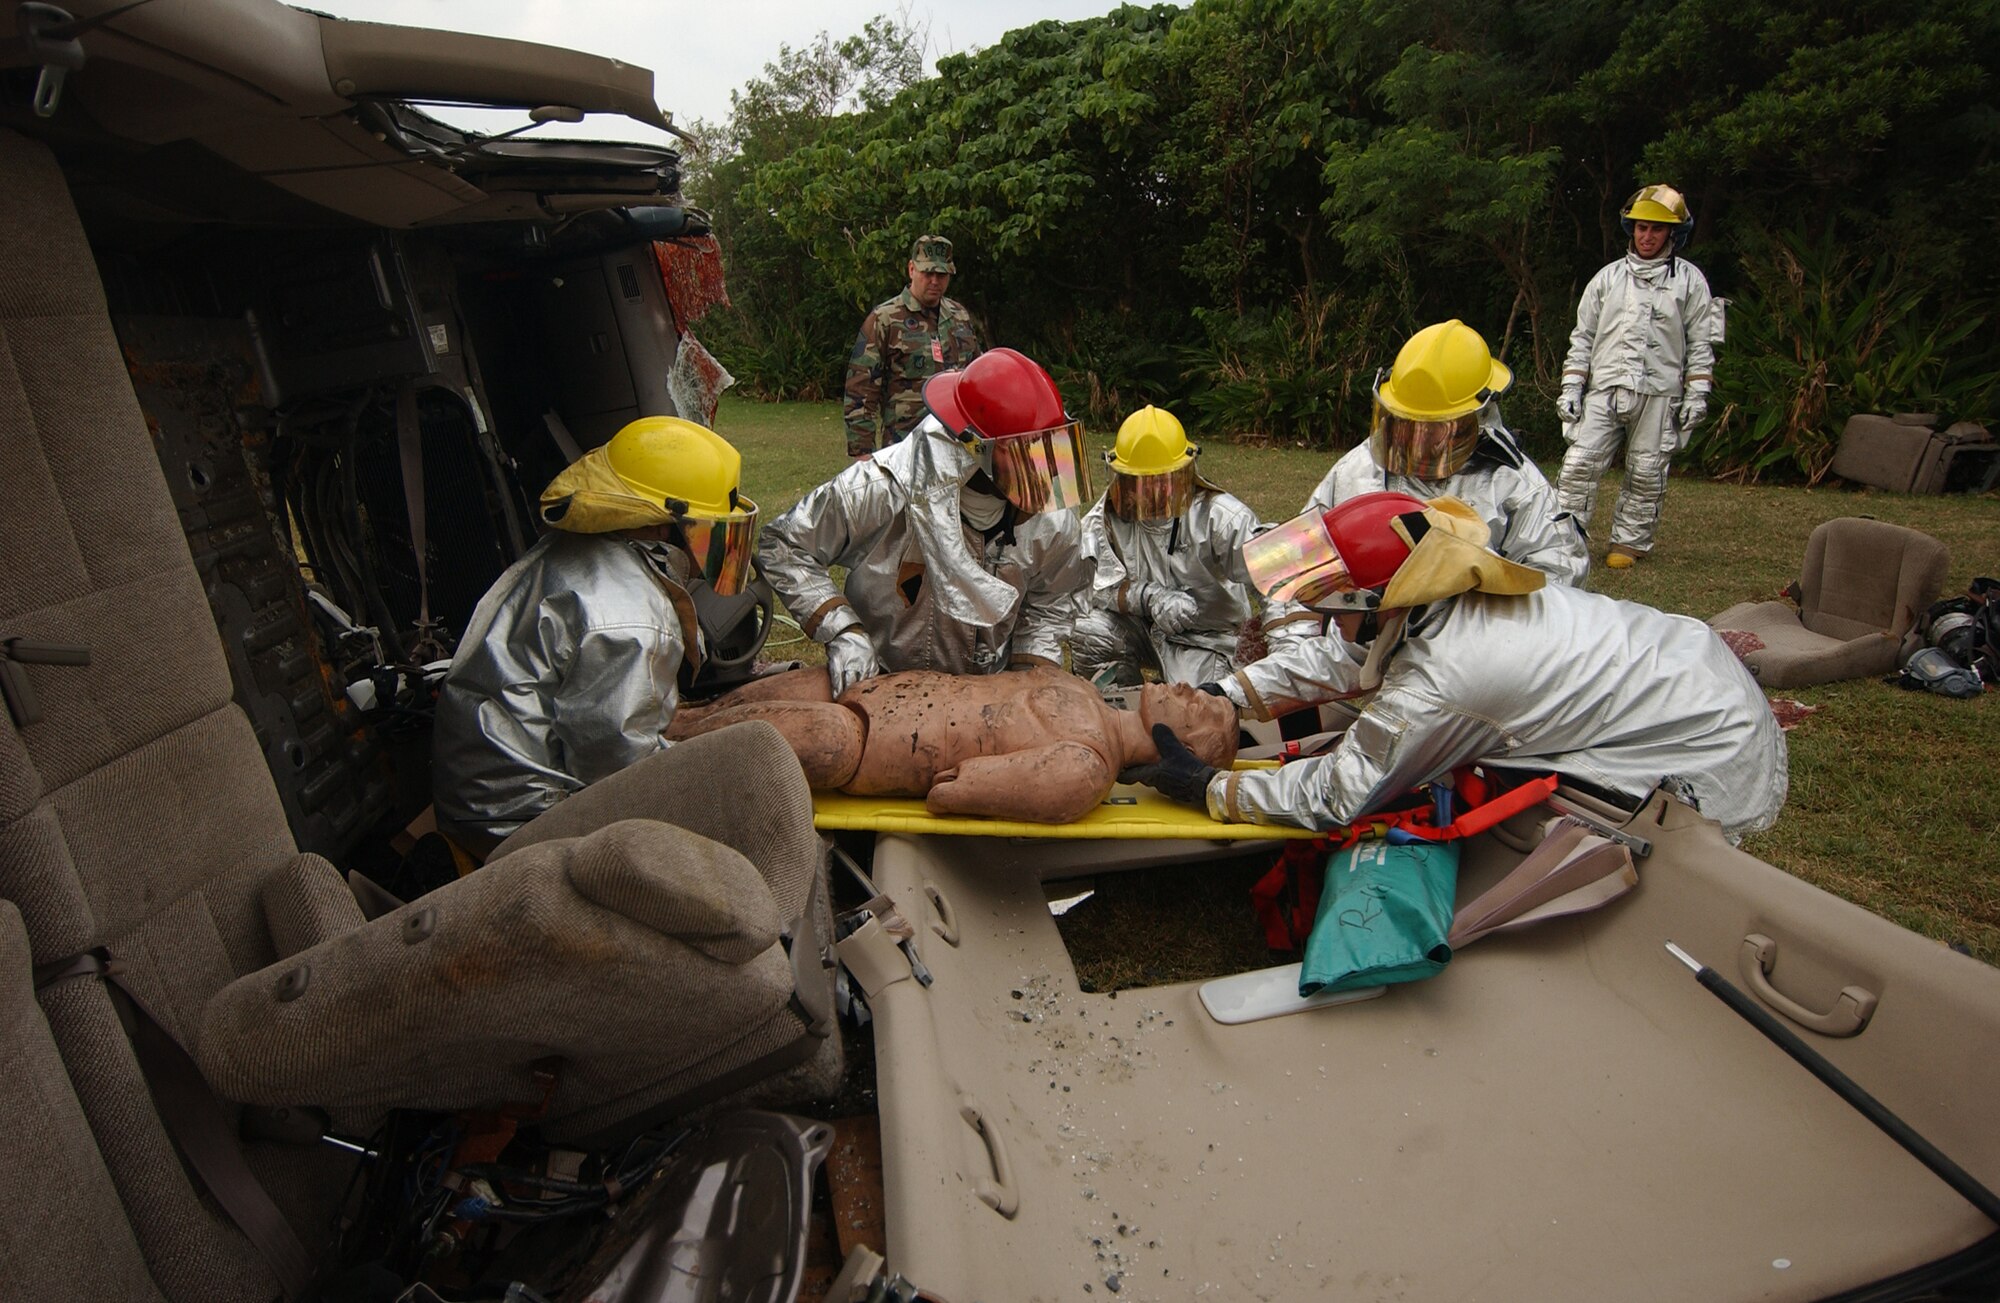 Airmen from the 18th Civil Engineer Squadron Fire Department pry open the roof of a vehicle to gain entry and help injured victims during a simulated collision of a van with a fuel truck during the Local Operational Readiness Exercise Beverly High 08-2 at Kadena Air Base, Japan, Dec. 3, 2007. These scenarios enable base agencies to work together, mitigate real-world situations, and heighten readiness capabilities.
(U.S. Air Force photo/Tech. Sgt. Rey Ramon)
